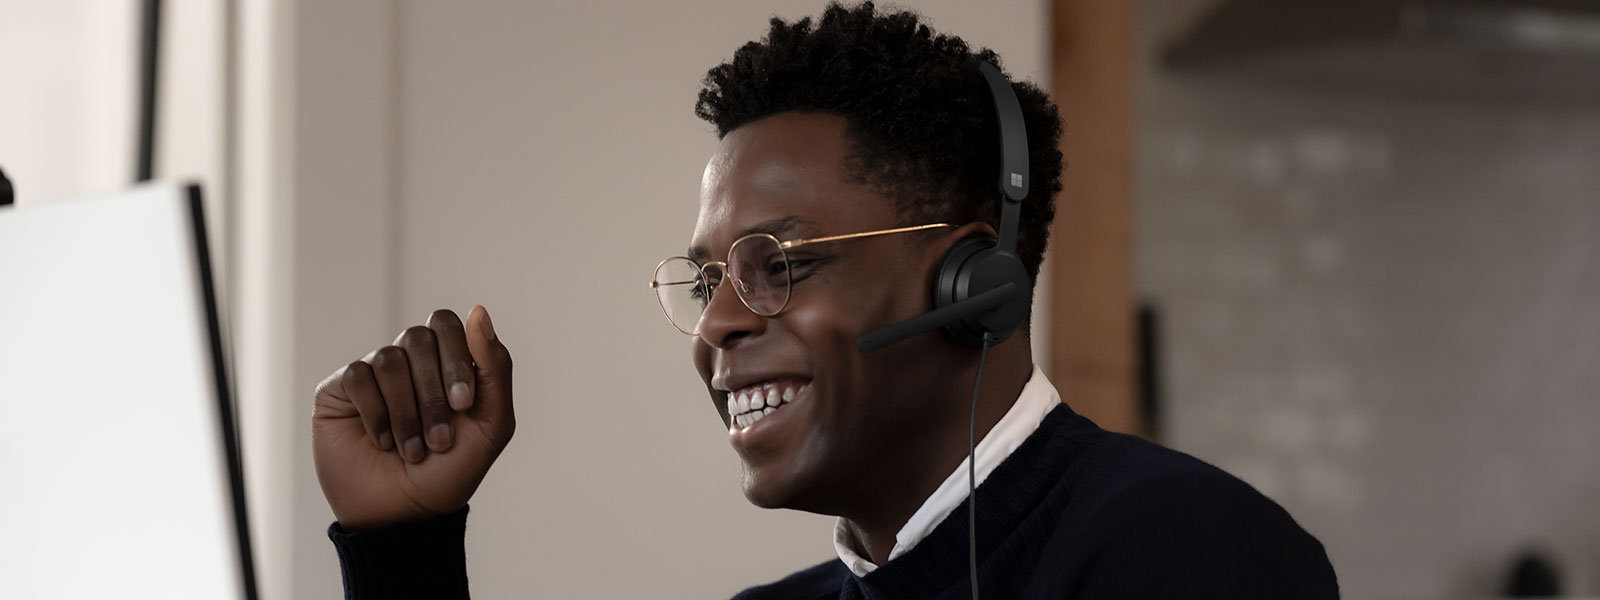 A male wearing a Microsoft Modern USB headset smiles at his computer screen with his hand raised